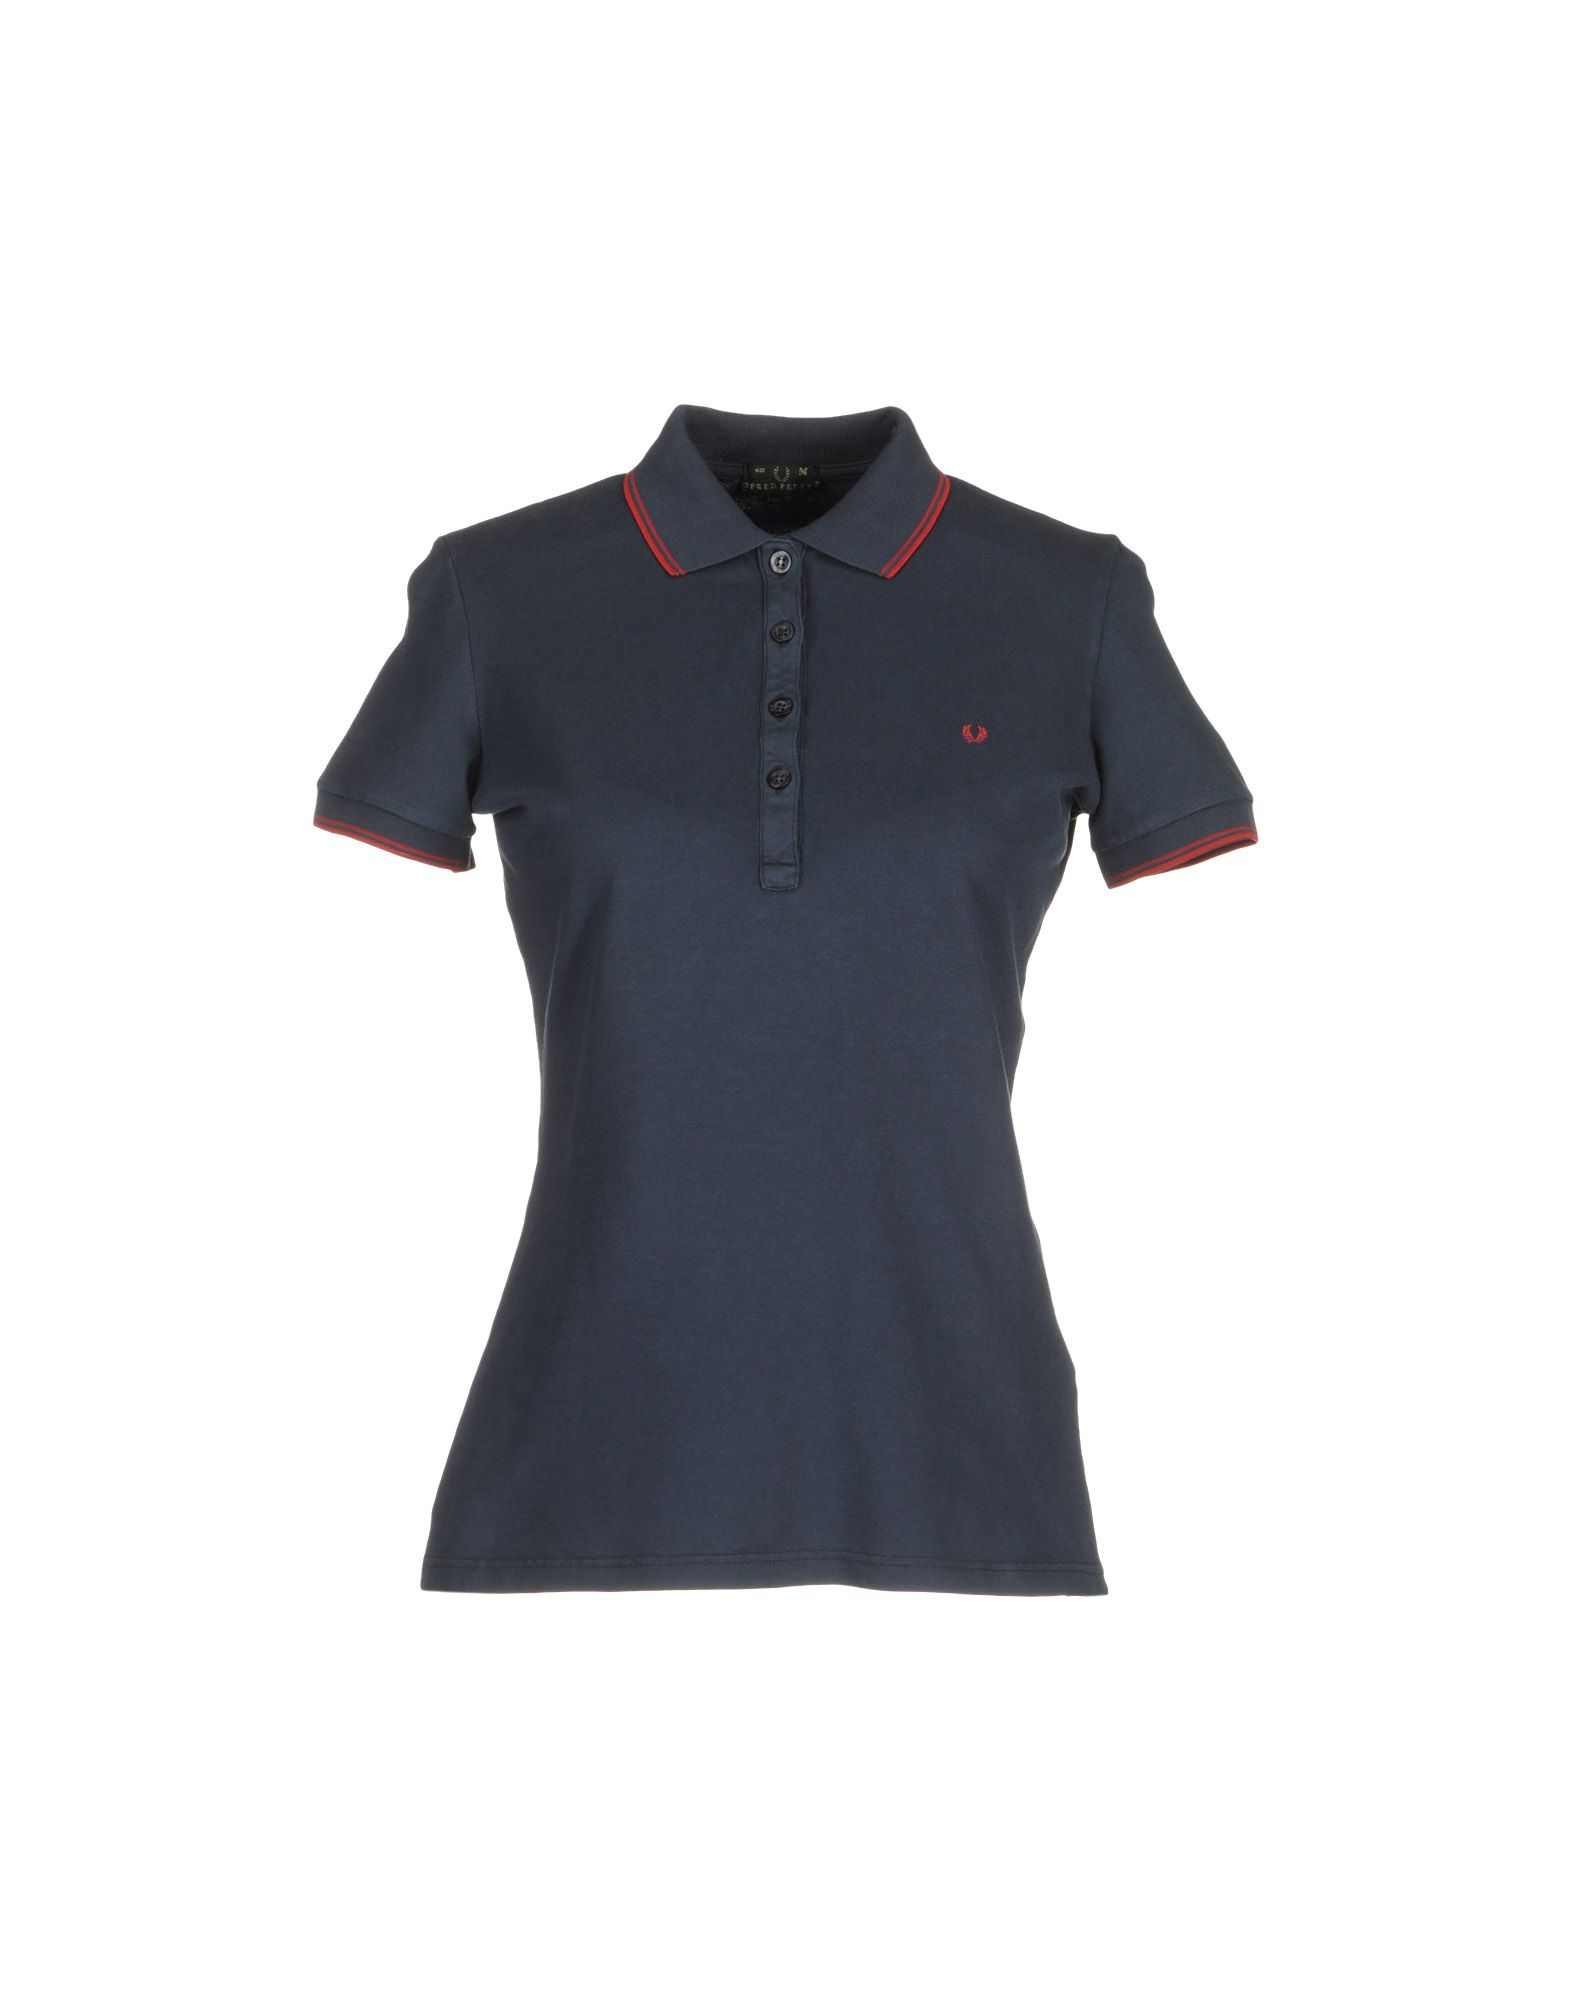 Foto fred perry polos
 foto 93562